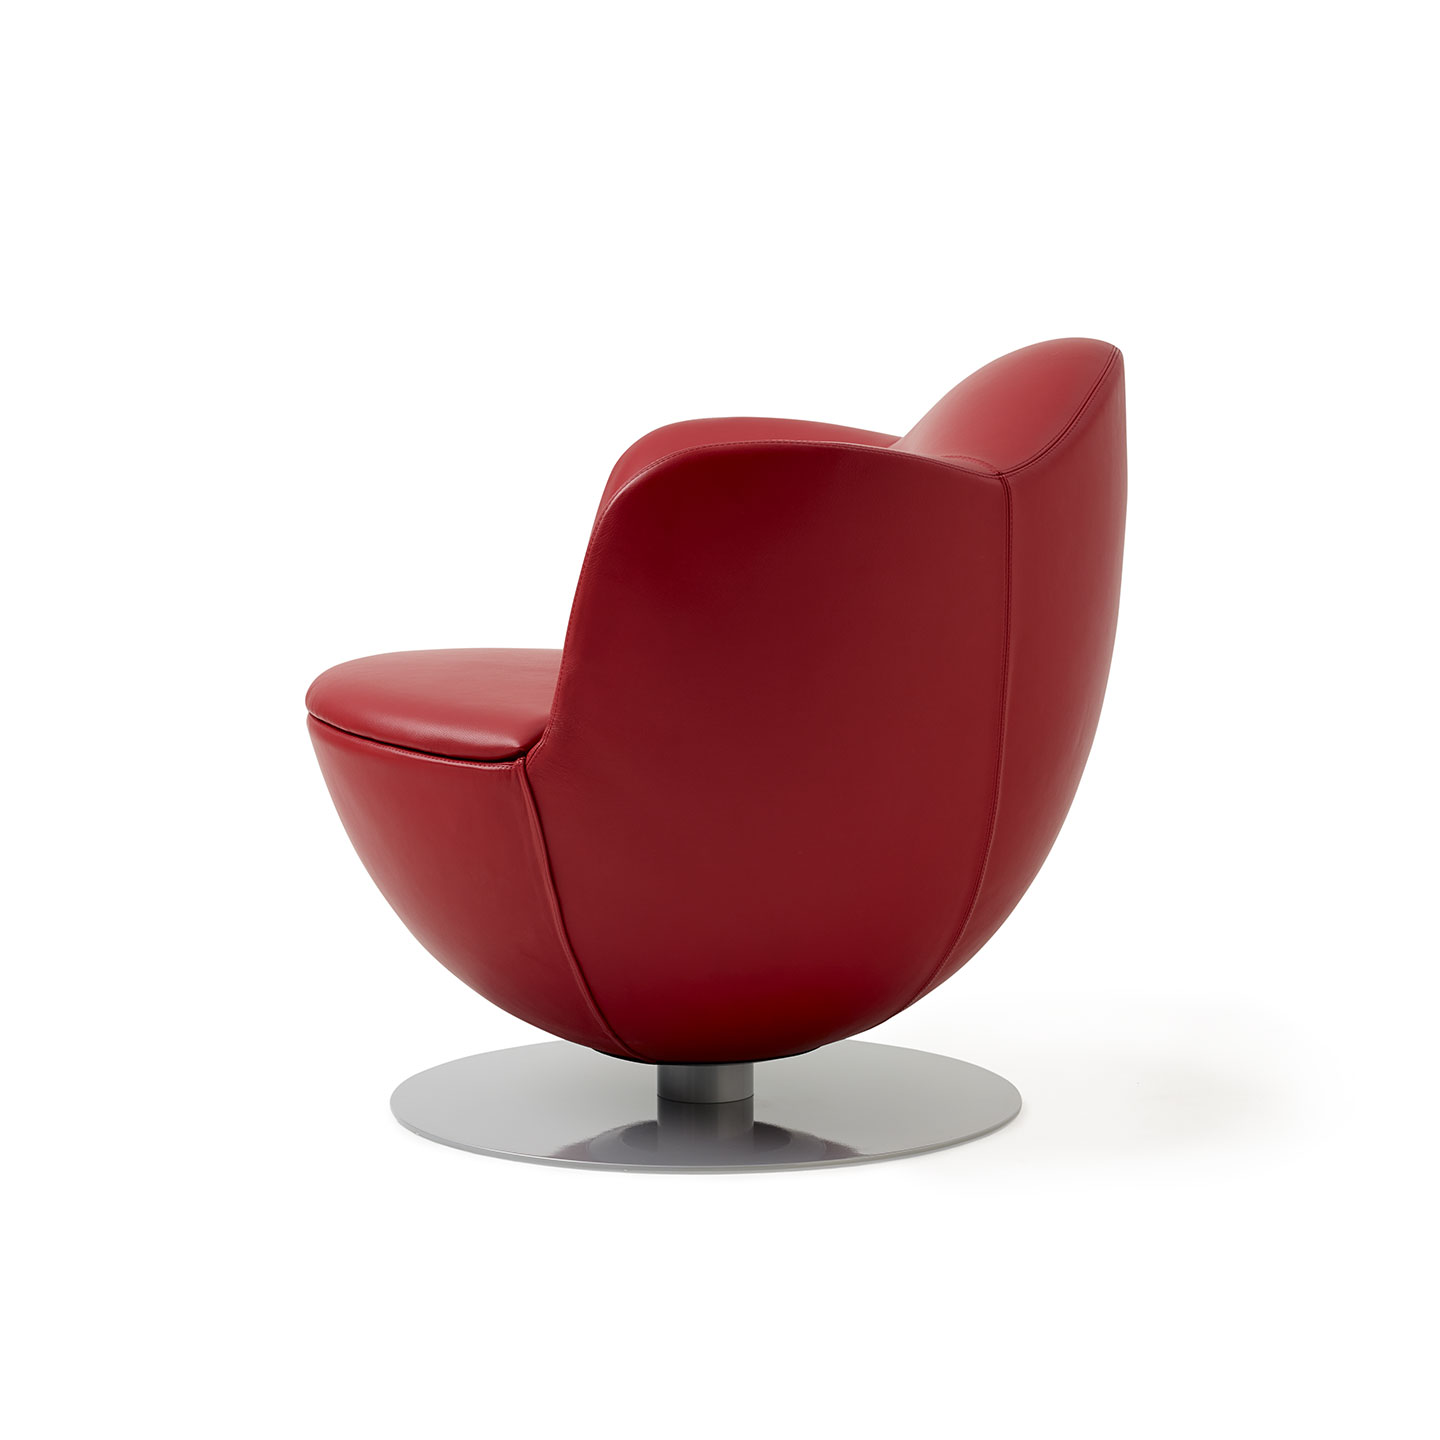 Haworth Dalia lounge chair in red leather back view